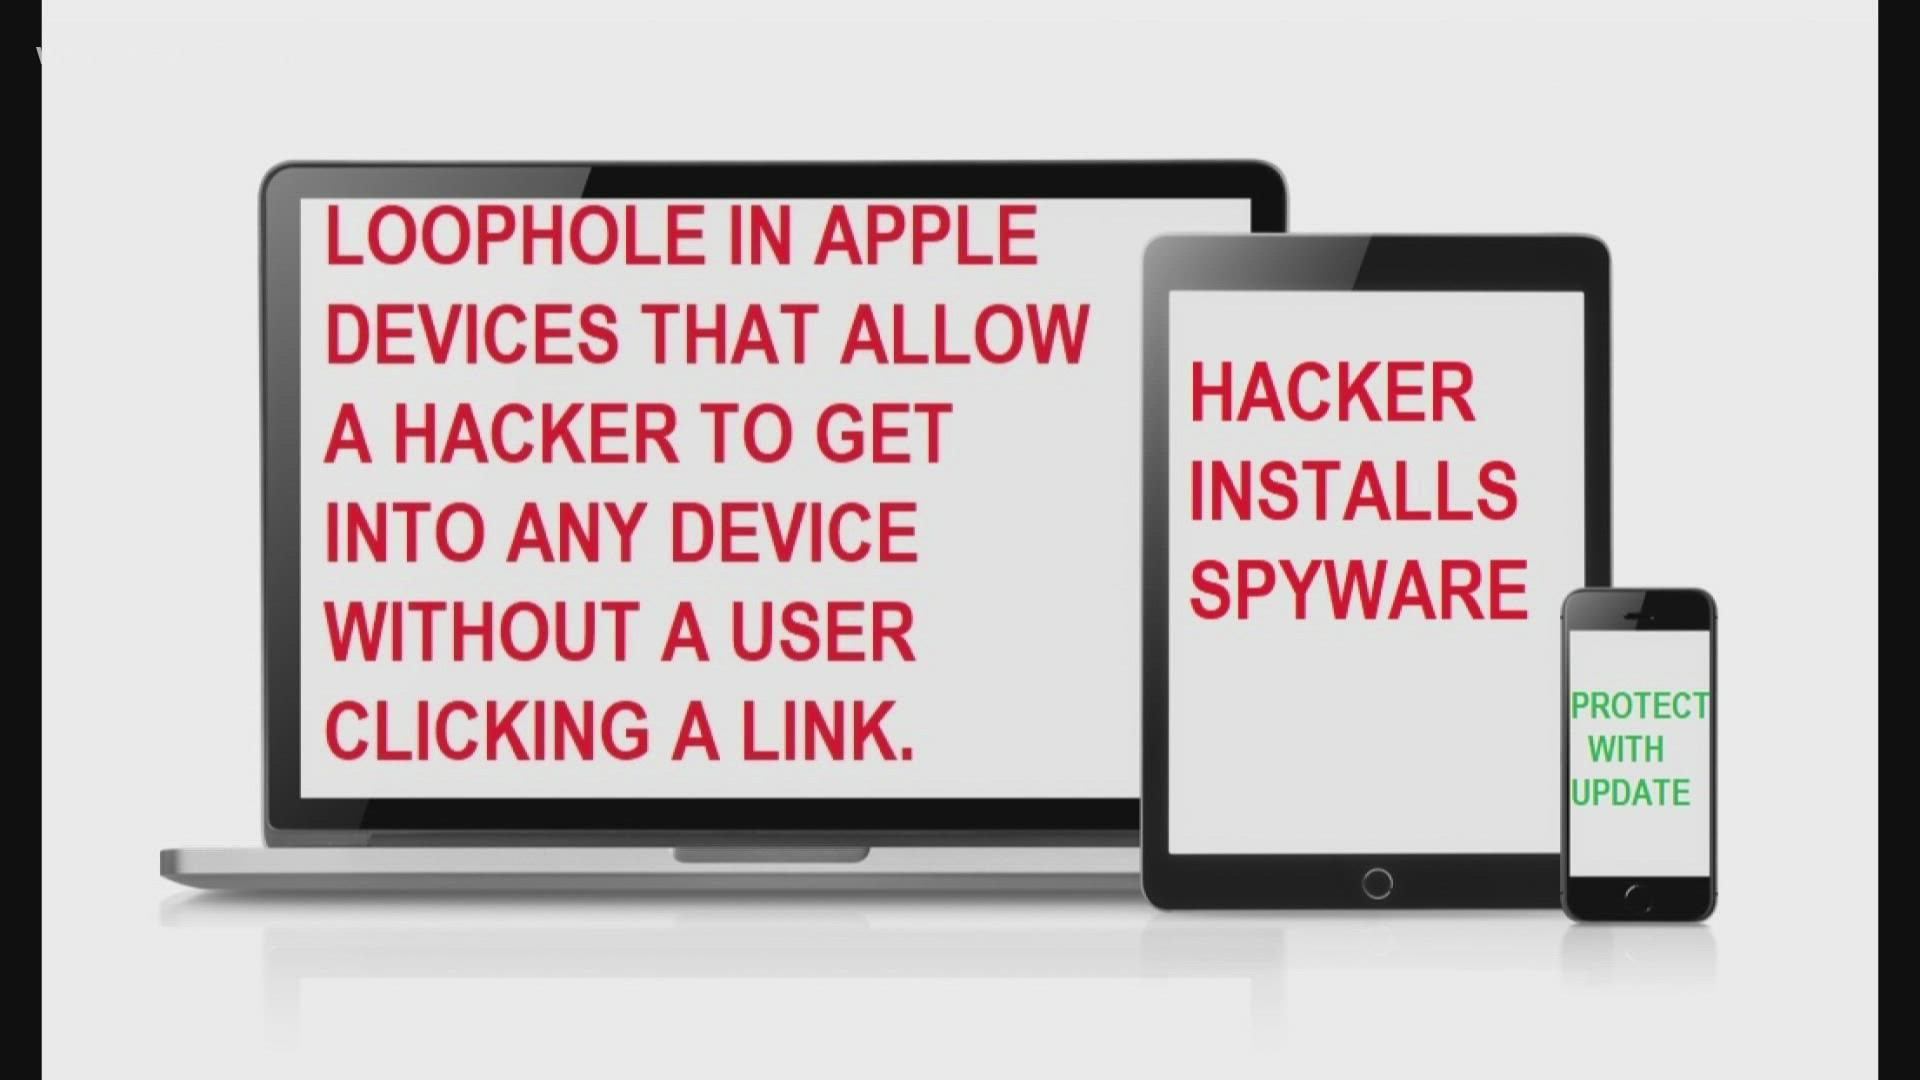 Apple said it experienced a cyberattack affecting all of its products. A critical update can protect users.